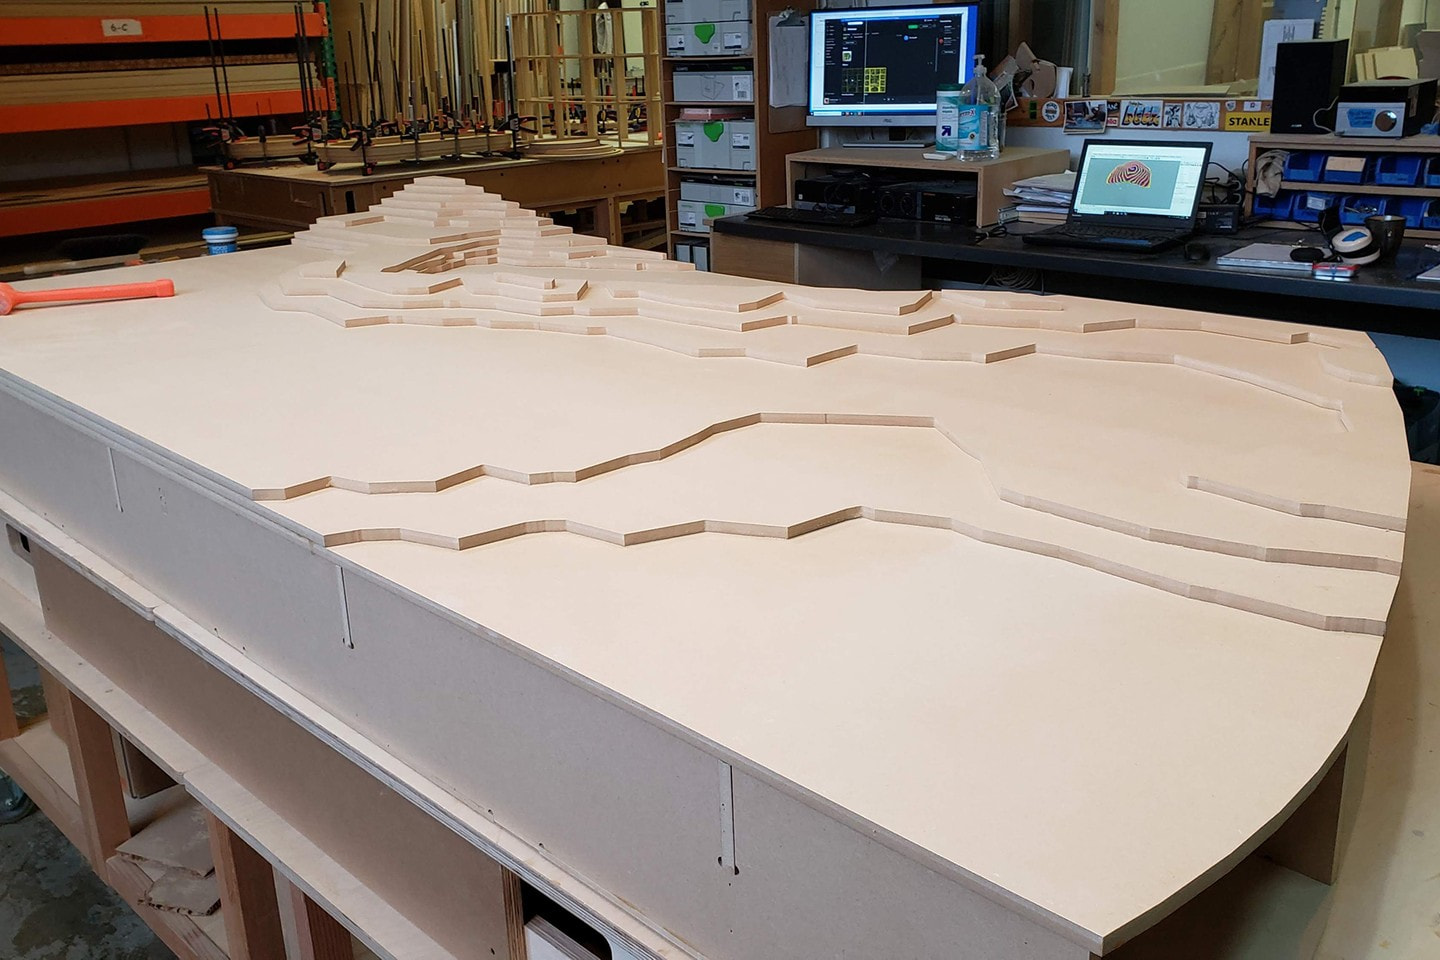 Fabrication of the table model to be used during development in Portland, OR